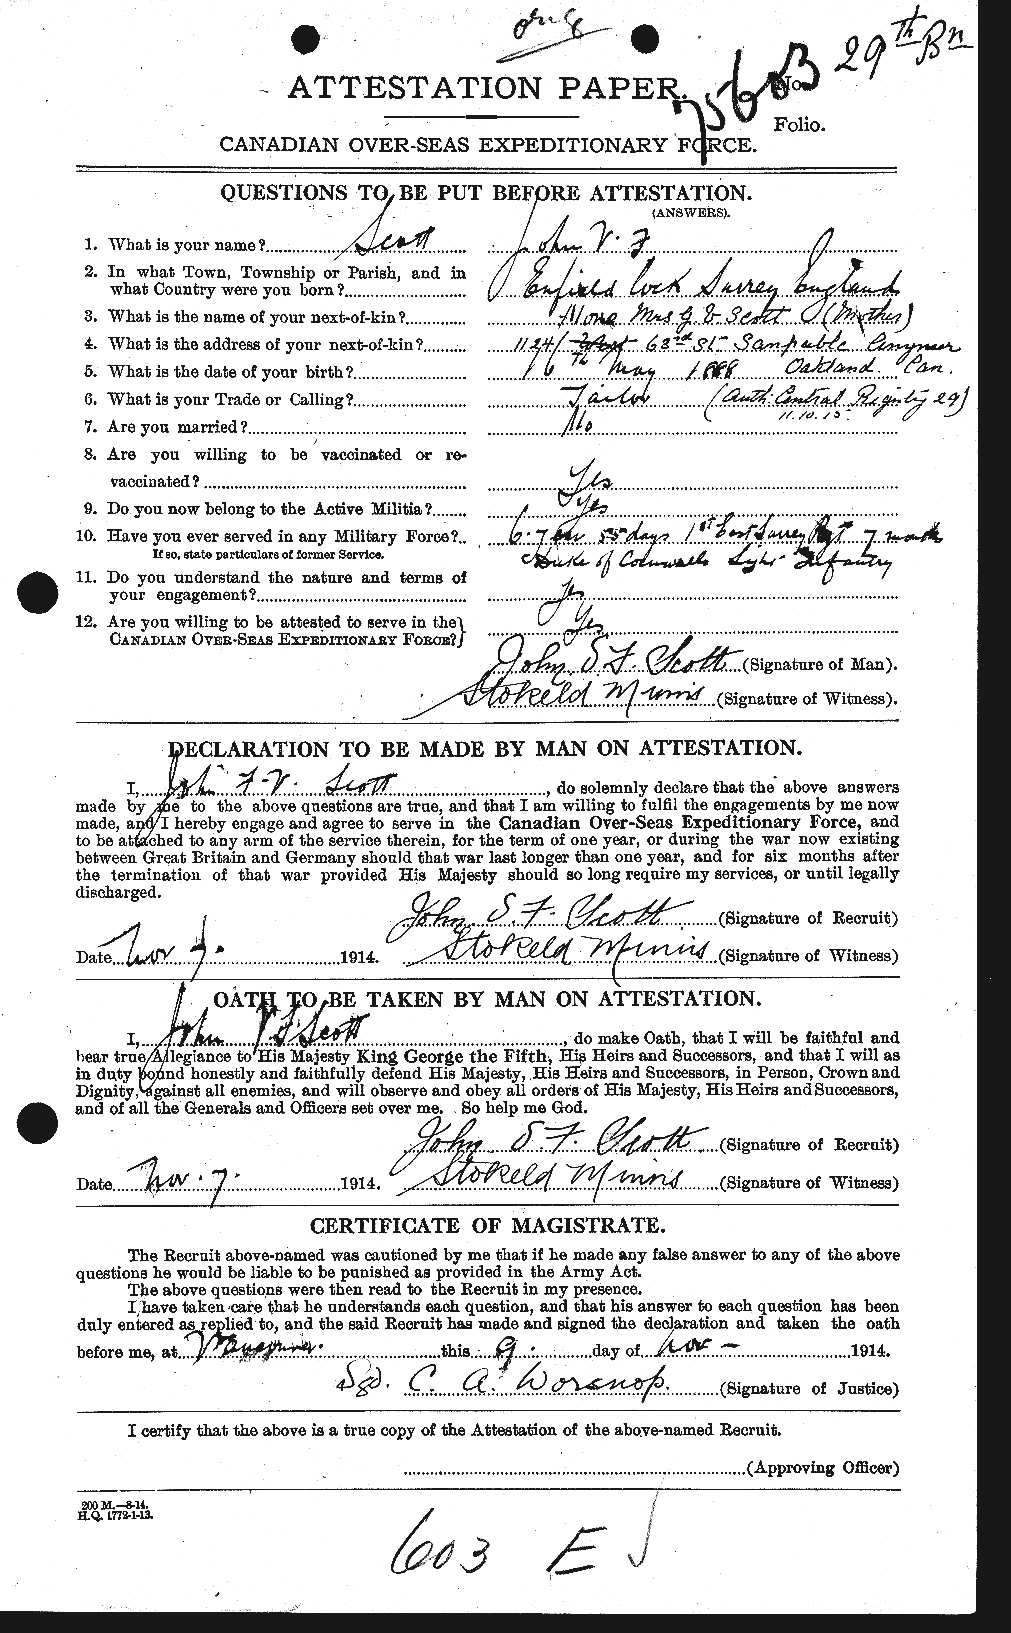 Personnel Records of the First World War - CEF 084414a